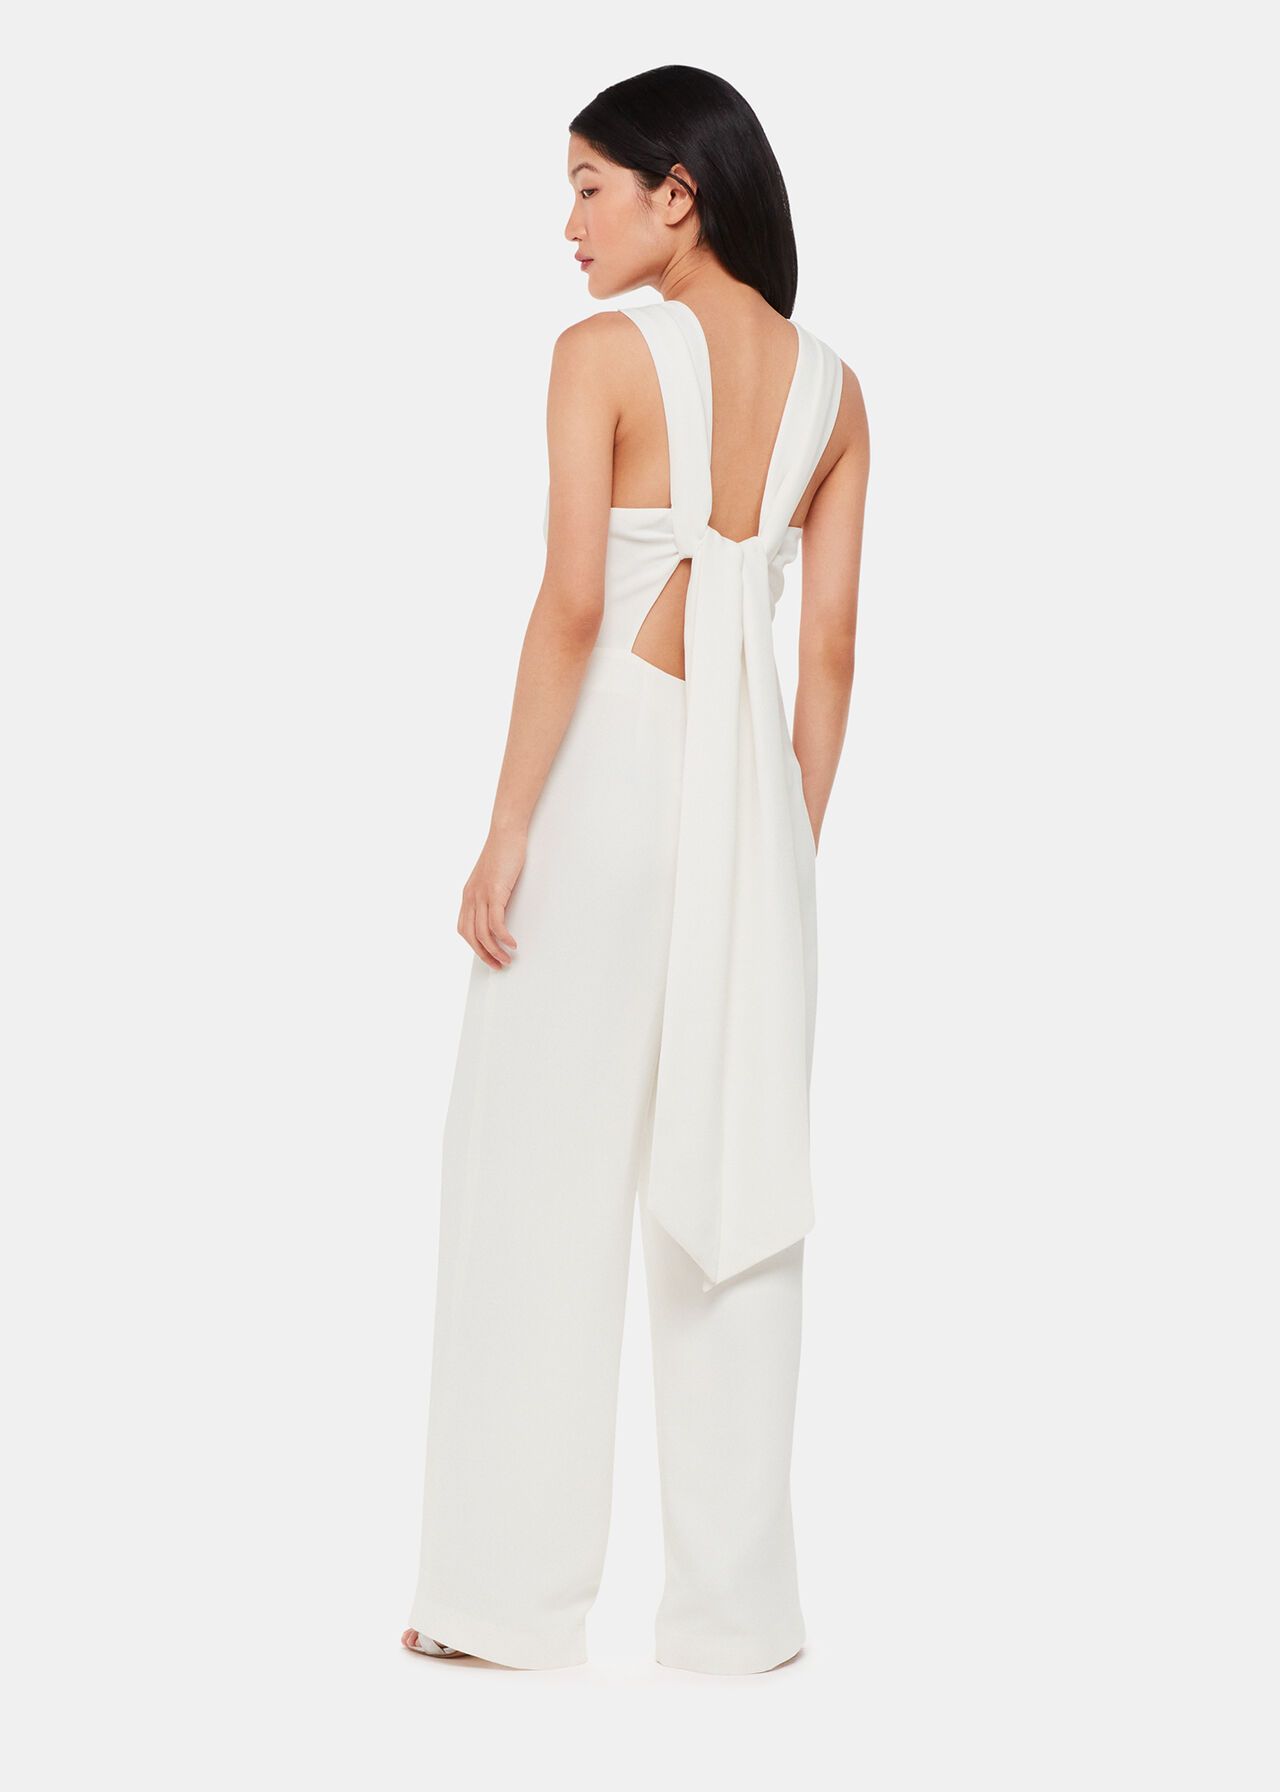 <p><strong>£399.00</strong></p><p><a href="https://www.whistles.com/product/tie-back-bridal-jumpsuit-34389.html">Shop Now</a></p><p>If you haven't already checked out Whistles' fire wedding collection what are you waiting for, ladies? We think this gorge tie-back jumpsuit is perfect for contemporary brides – although the high neckline and wide-leg silhouette means it can defs be styled for church weddings, too. </p>